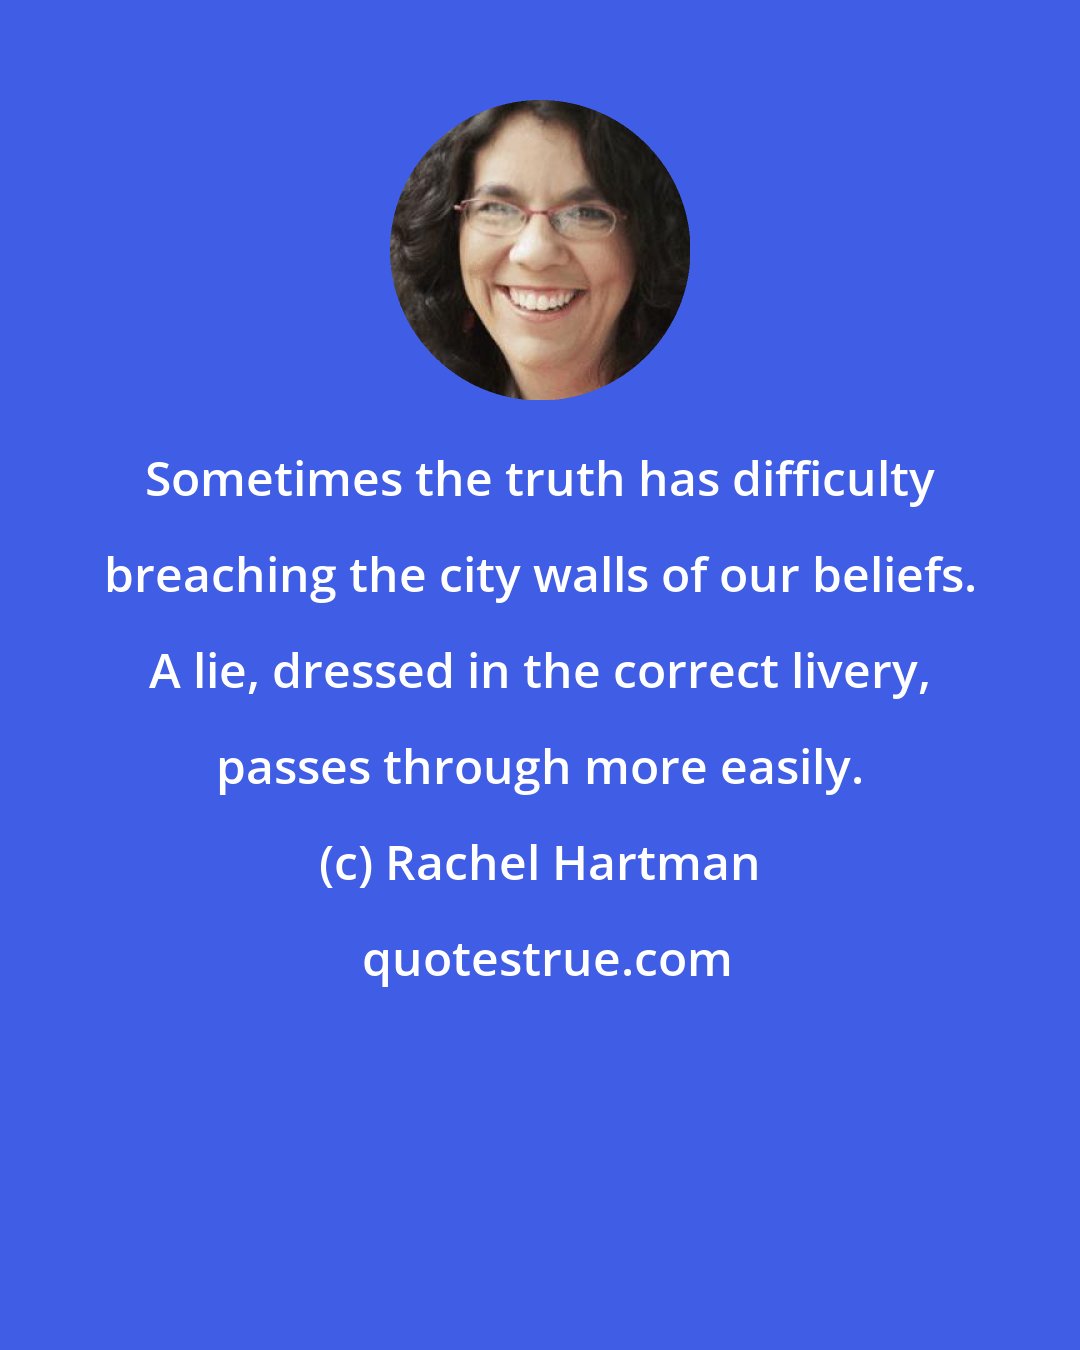 Rachel Hartman: Sometimes the truth has difficulty breaching the city walls of our beliefs. A lie, dressed in the correct livery, passes through more easily.